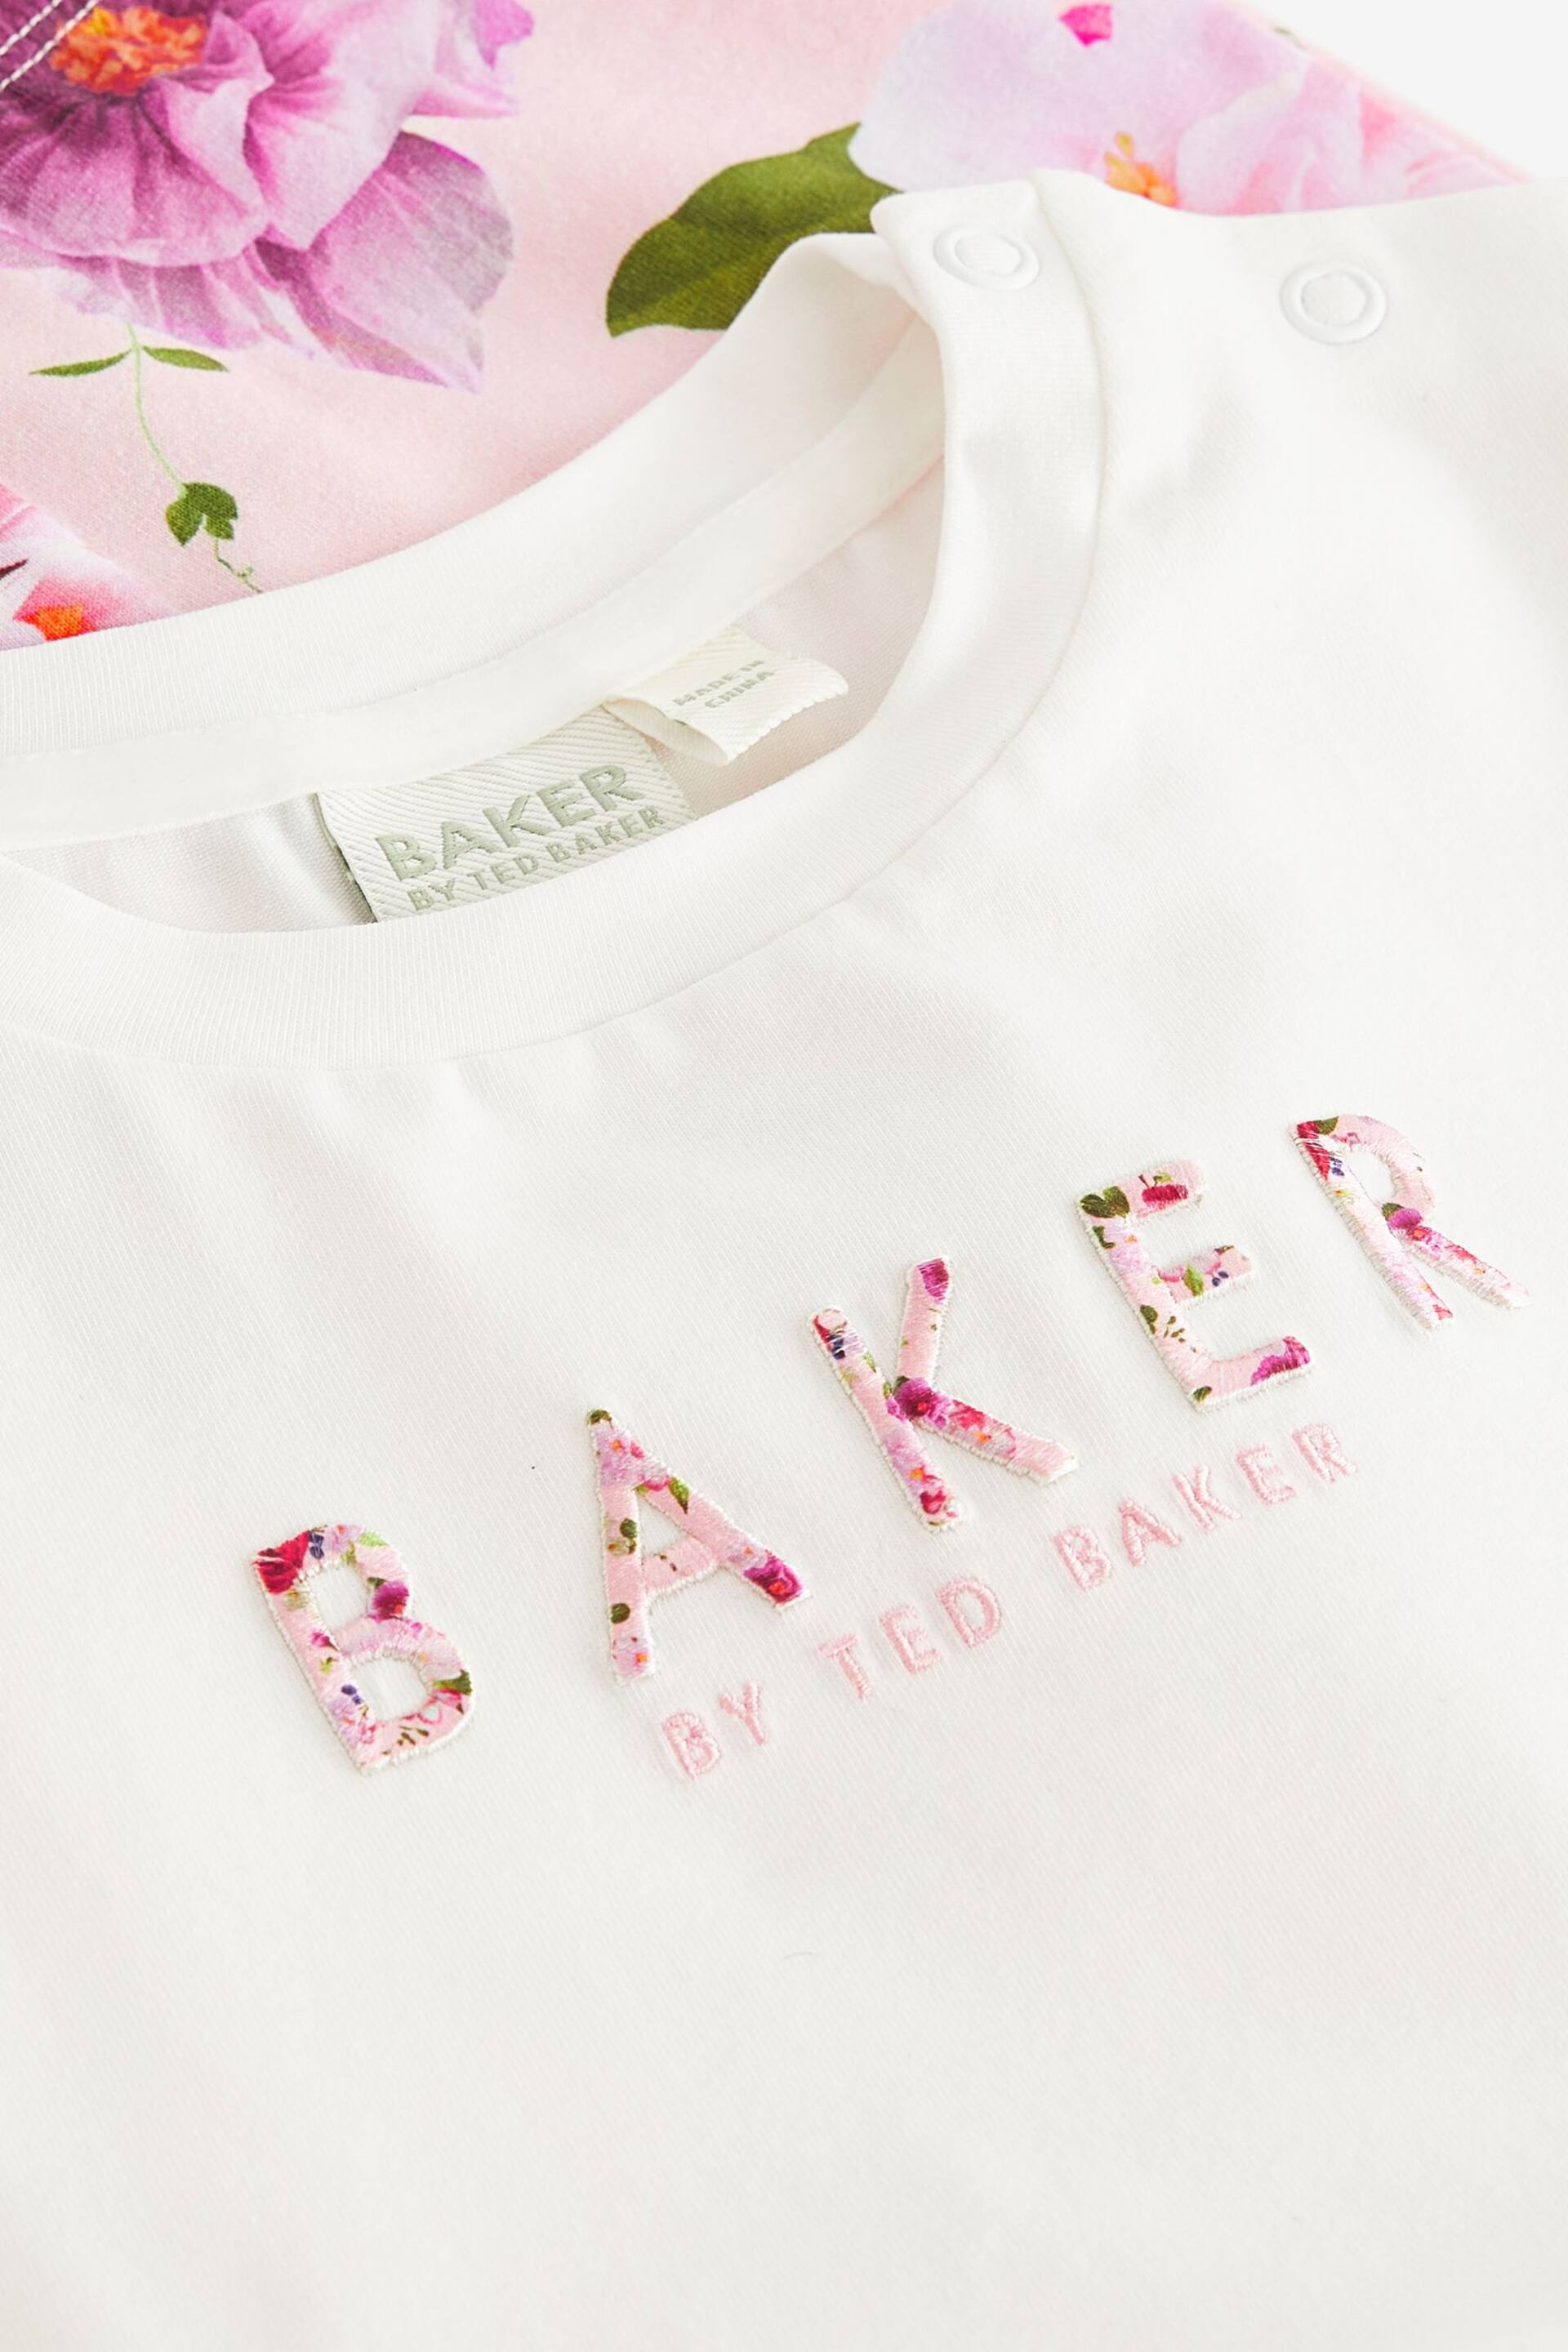 Baker by Ted Baker Organza Peplum T-Shirt and Legging Set - Image 10 of 12